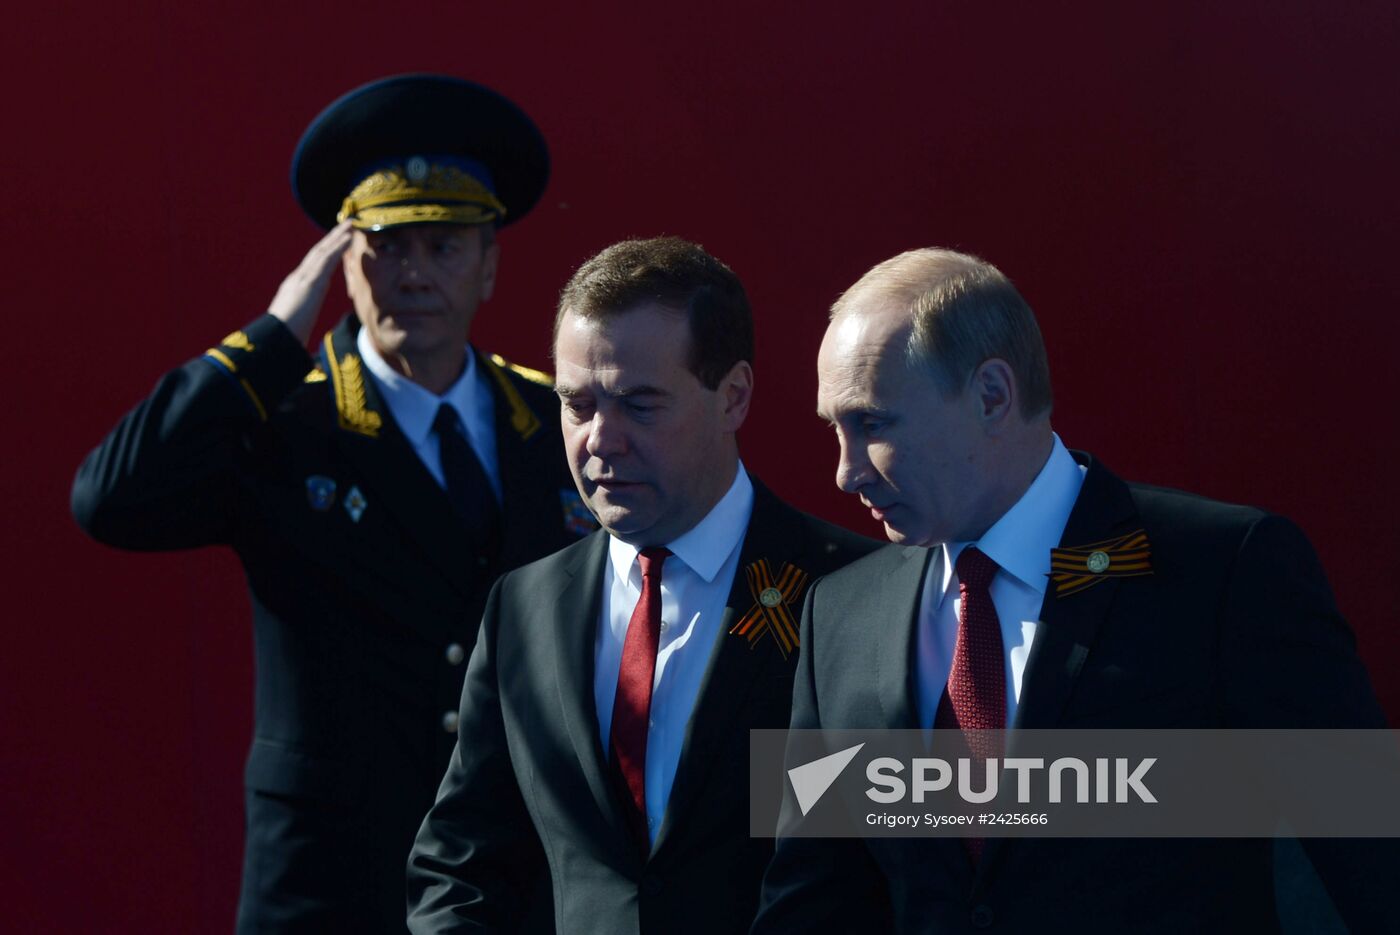 Vladimir Putin and Dmitry Medvedev attend Victory Day parade on Red Square